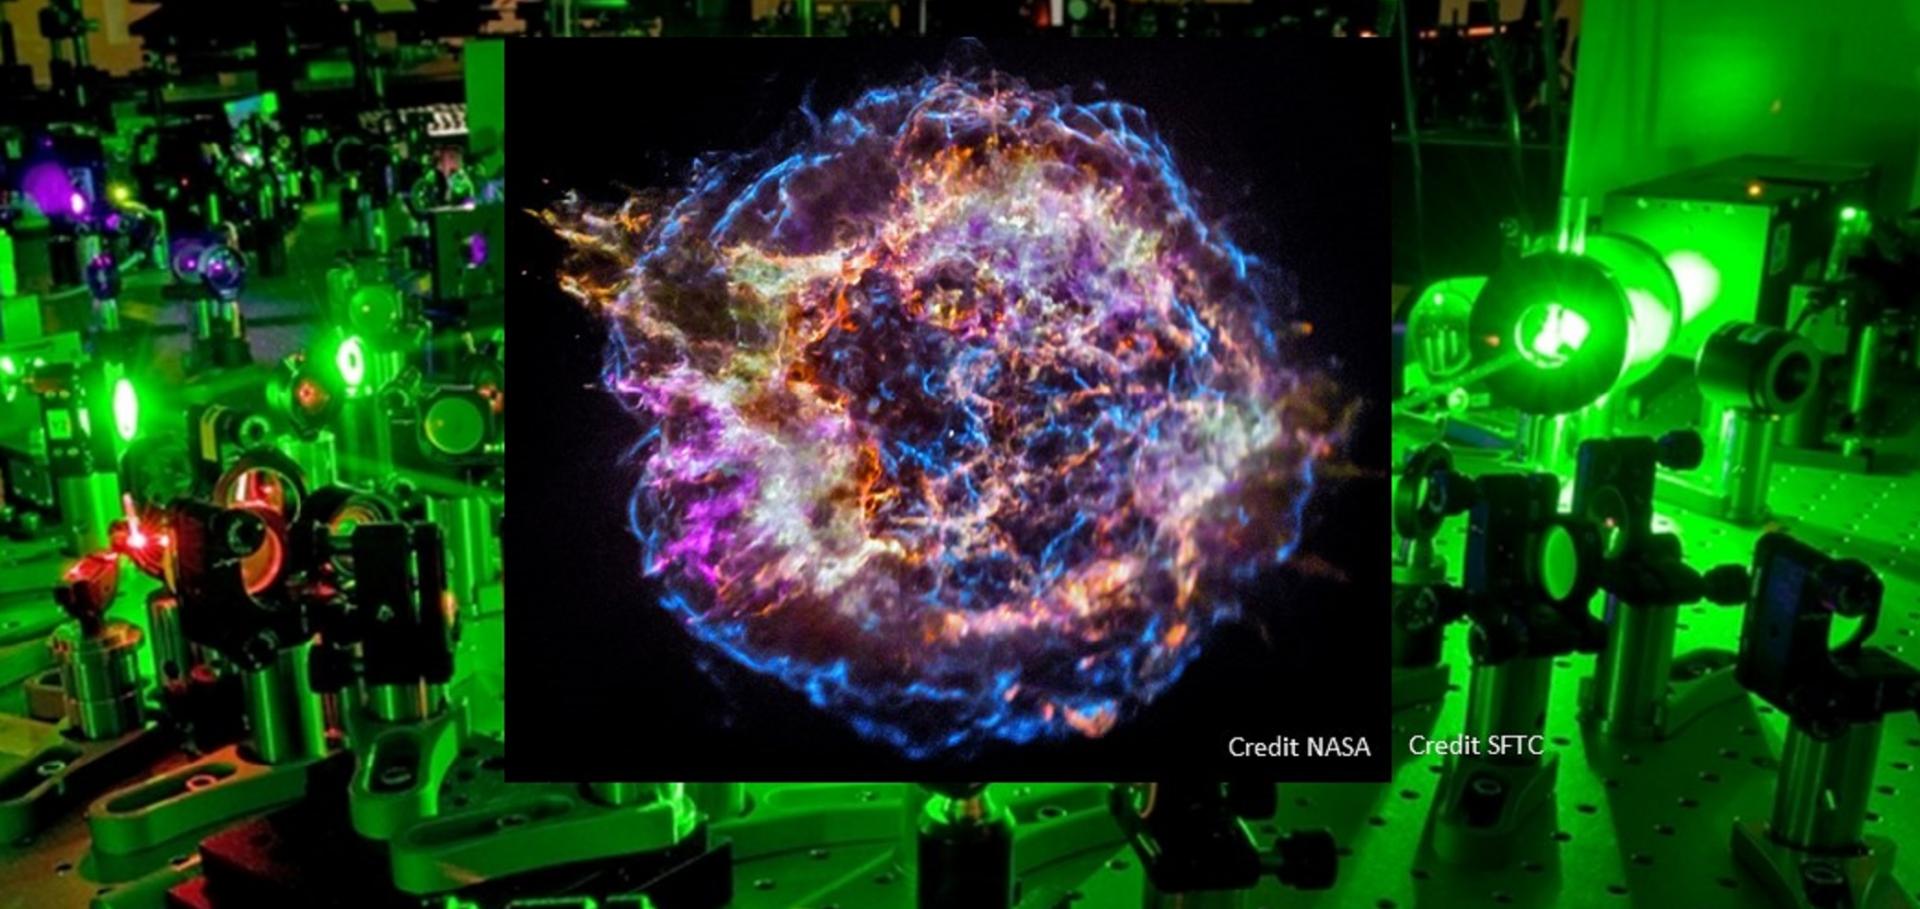 A CHANDRA image of the supernova remnant Cas A superimposed on the Gemini laser at the UK Central Laser Facility